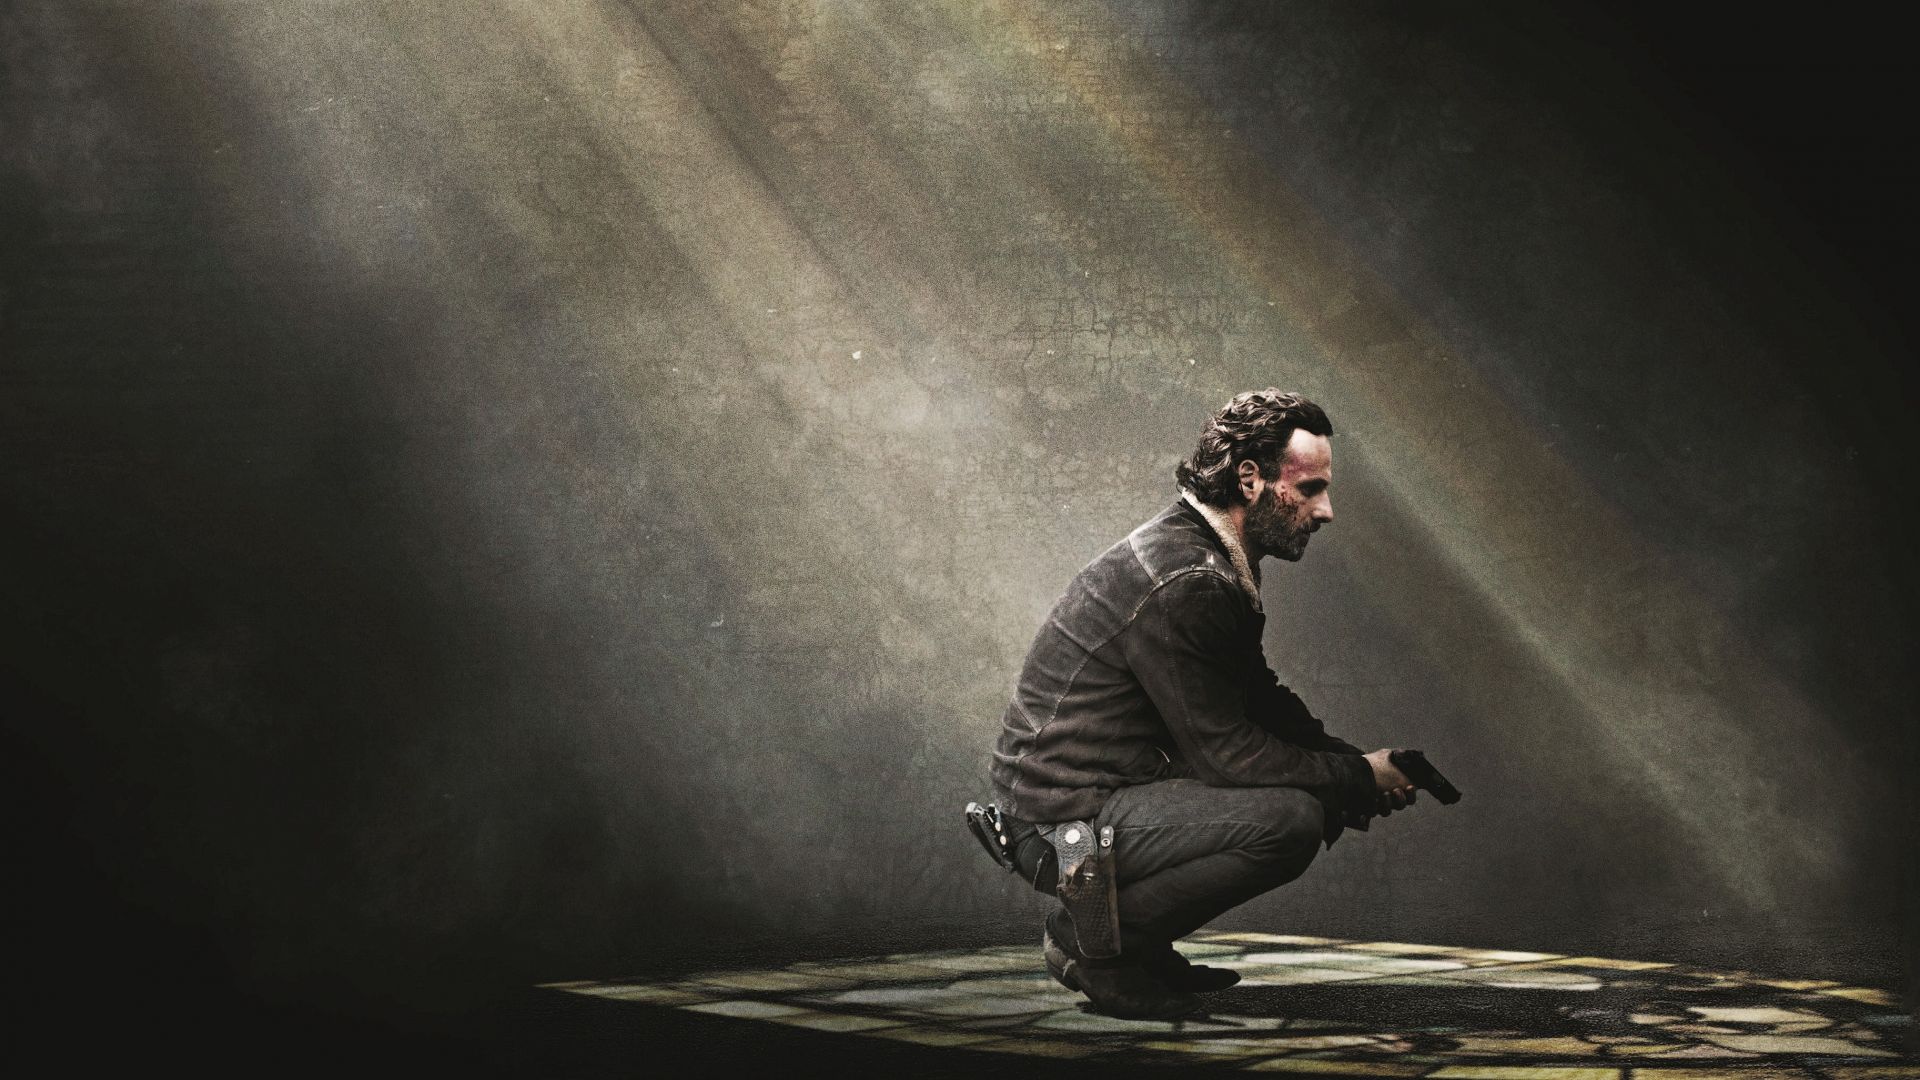 Desktop Wallpaper Andrew Lincoln In The Walking Dead Tv Series, HD Image, Picture, Background, Ou4pfi